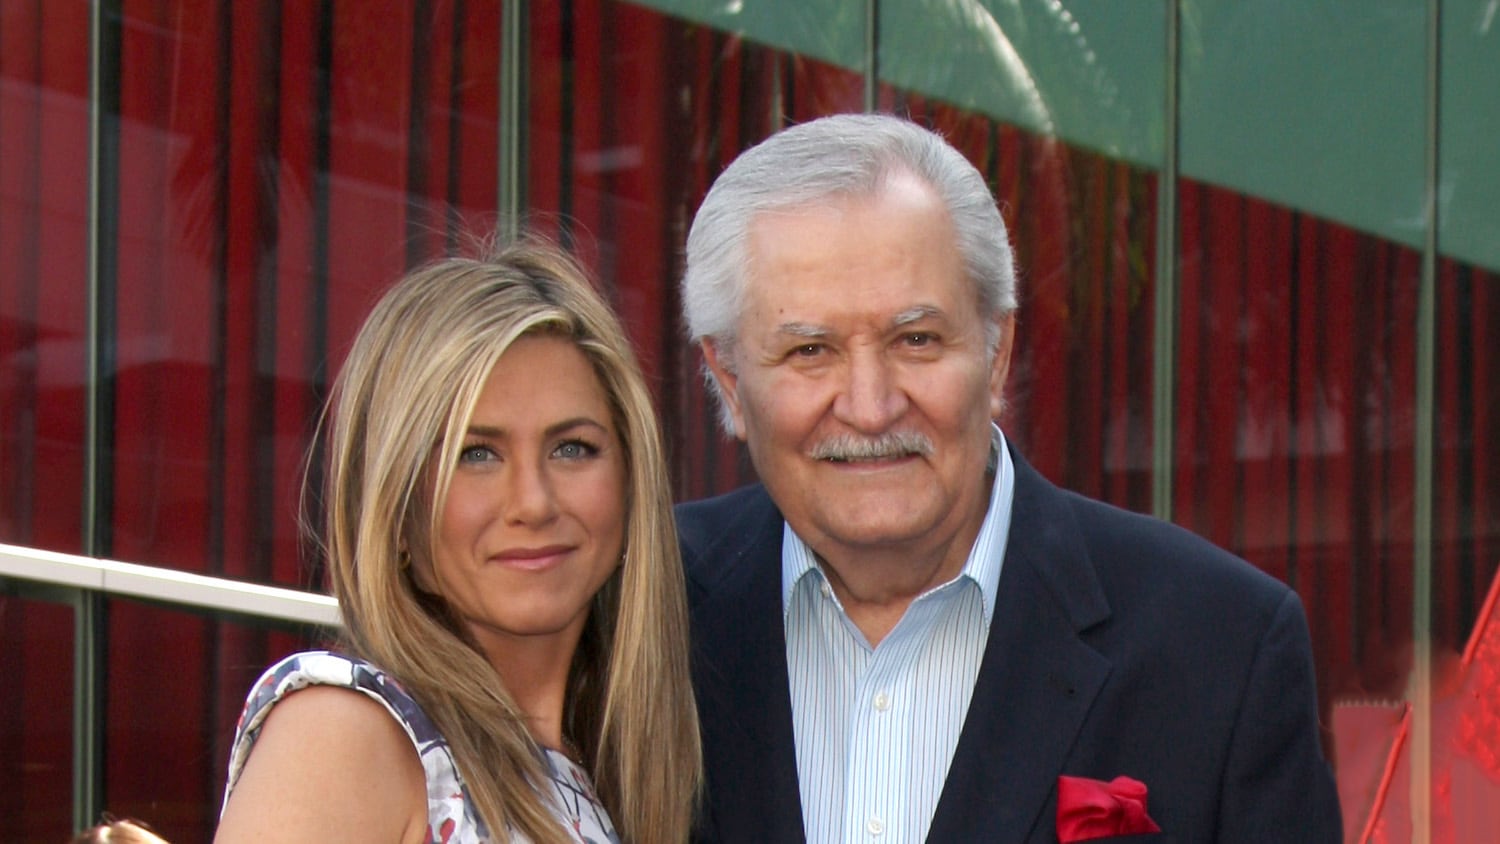 John Aniston, ‘Days of Our Lives’ Star & Jennifer Aniston’s Father, Diied